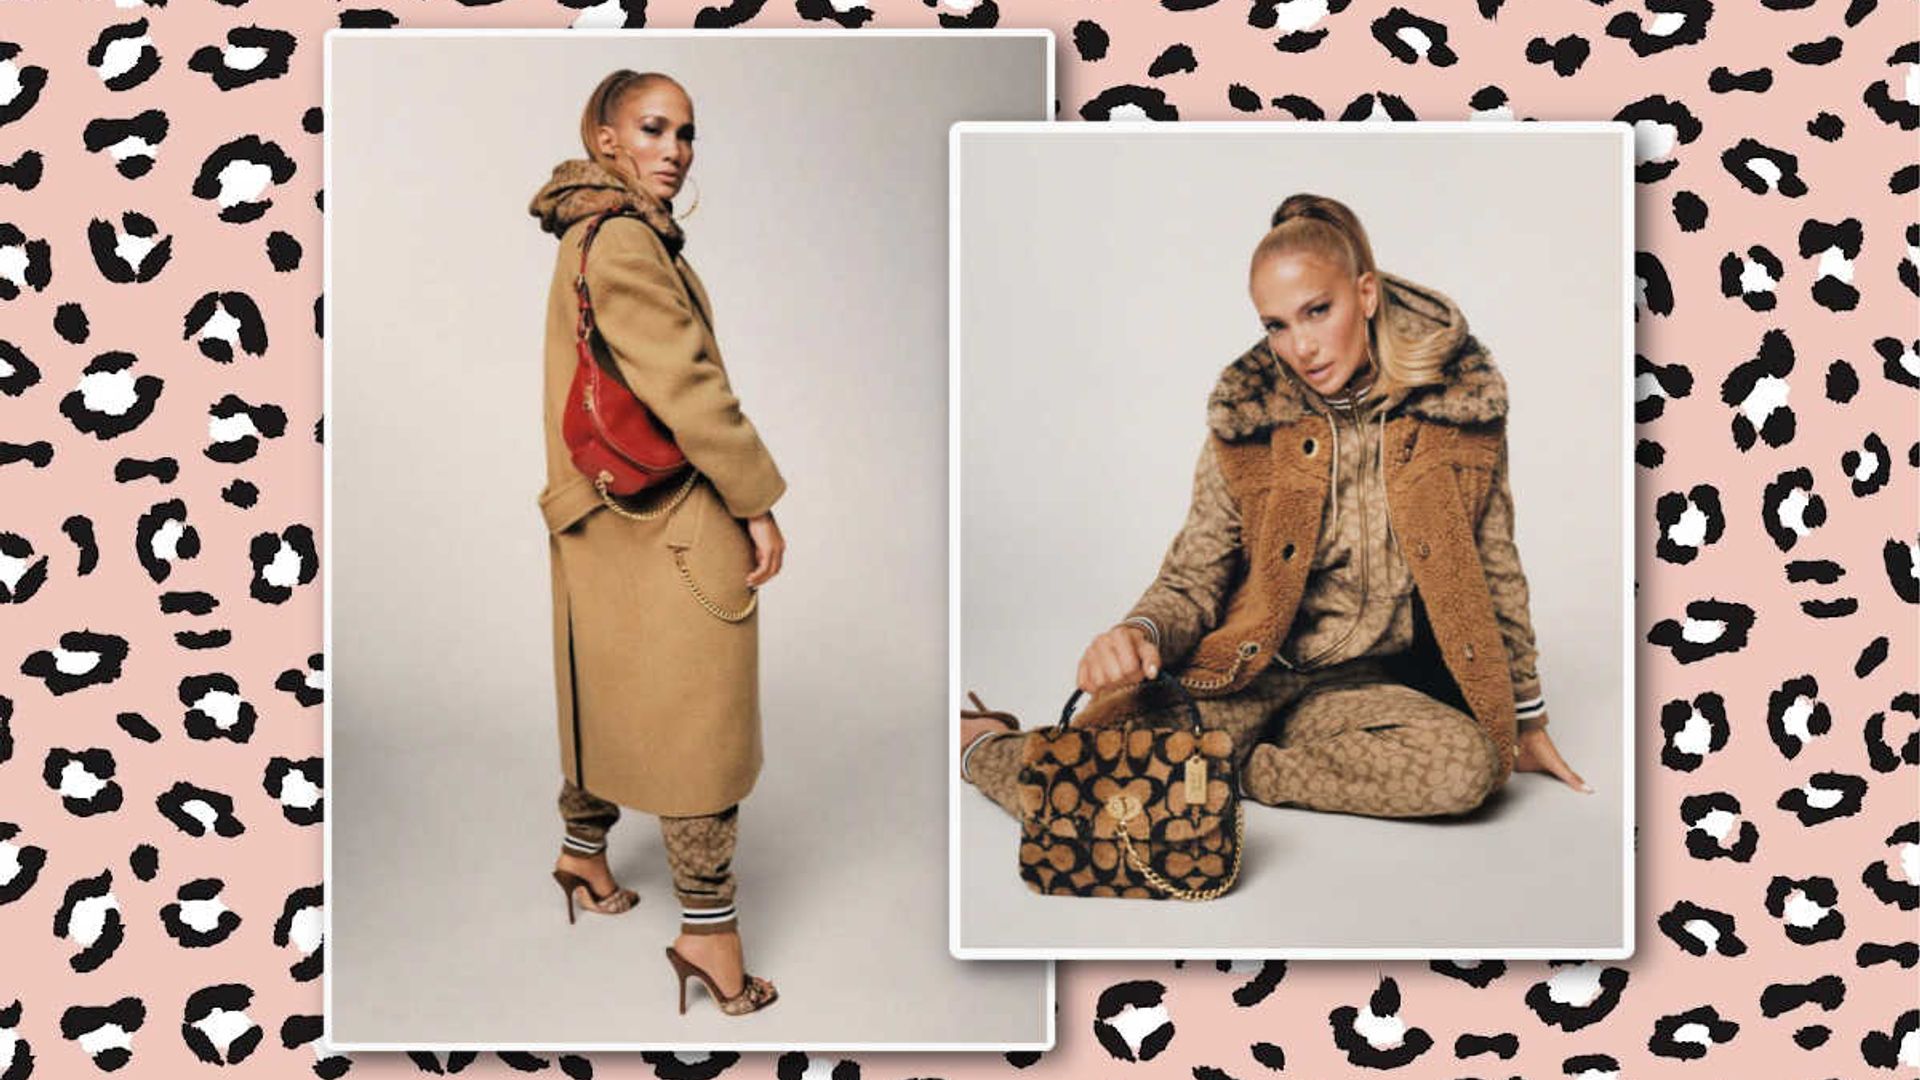 Coach x Jennifer Lopez has landed at Coach Outlet - and there's 